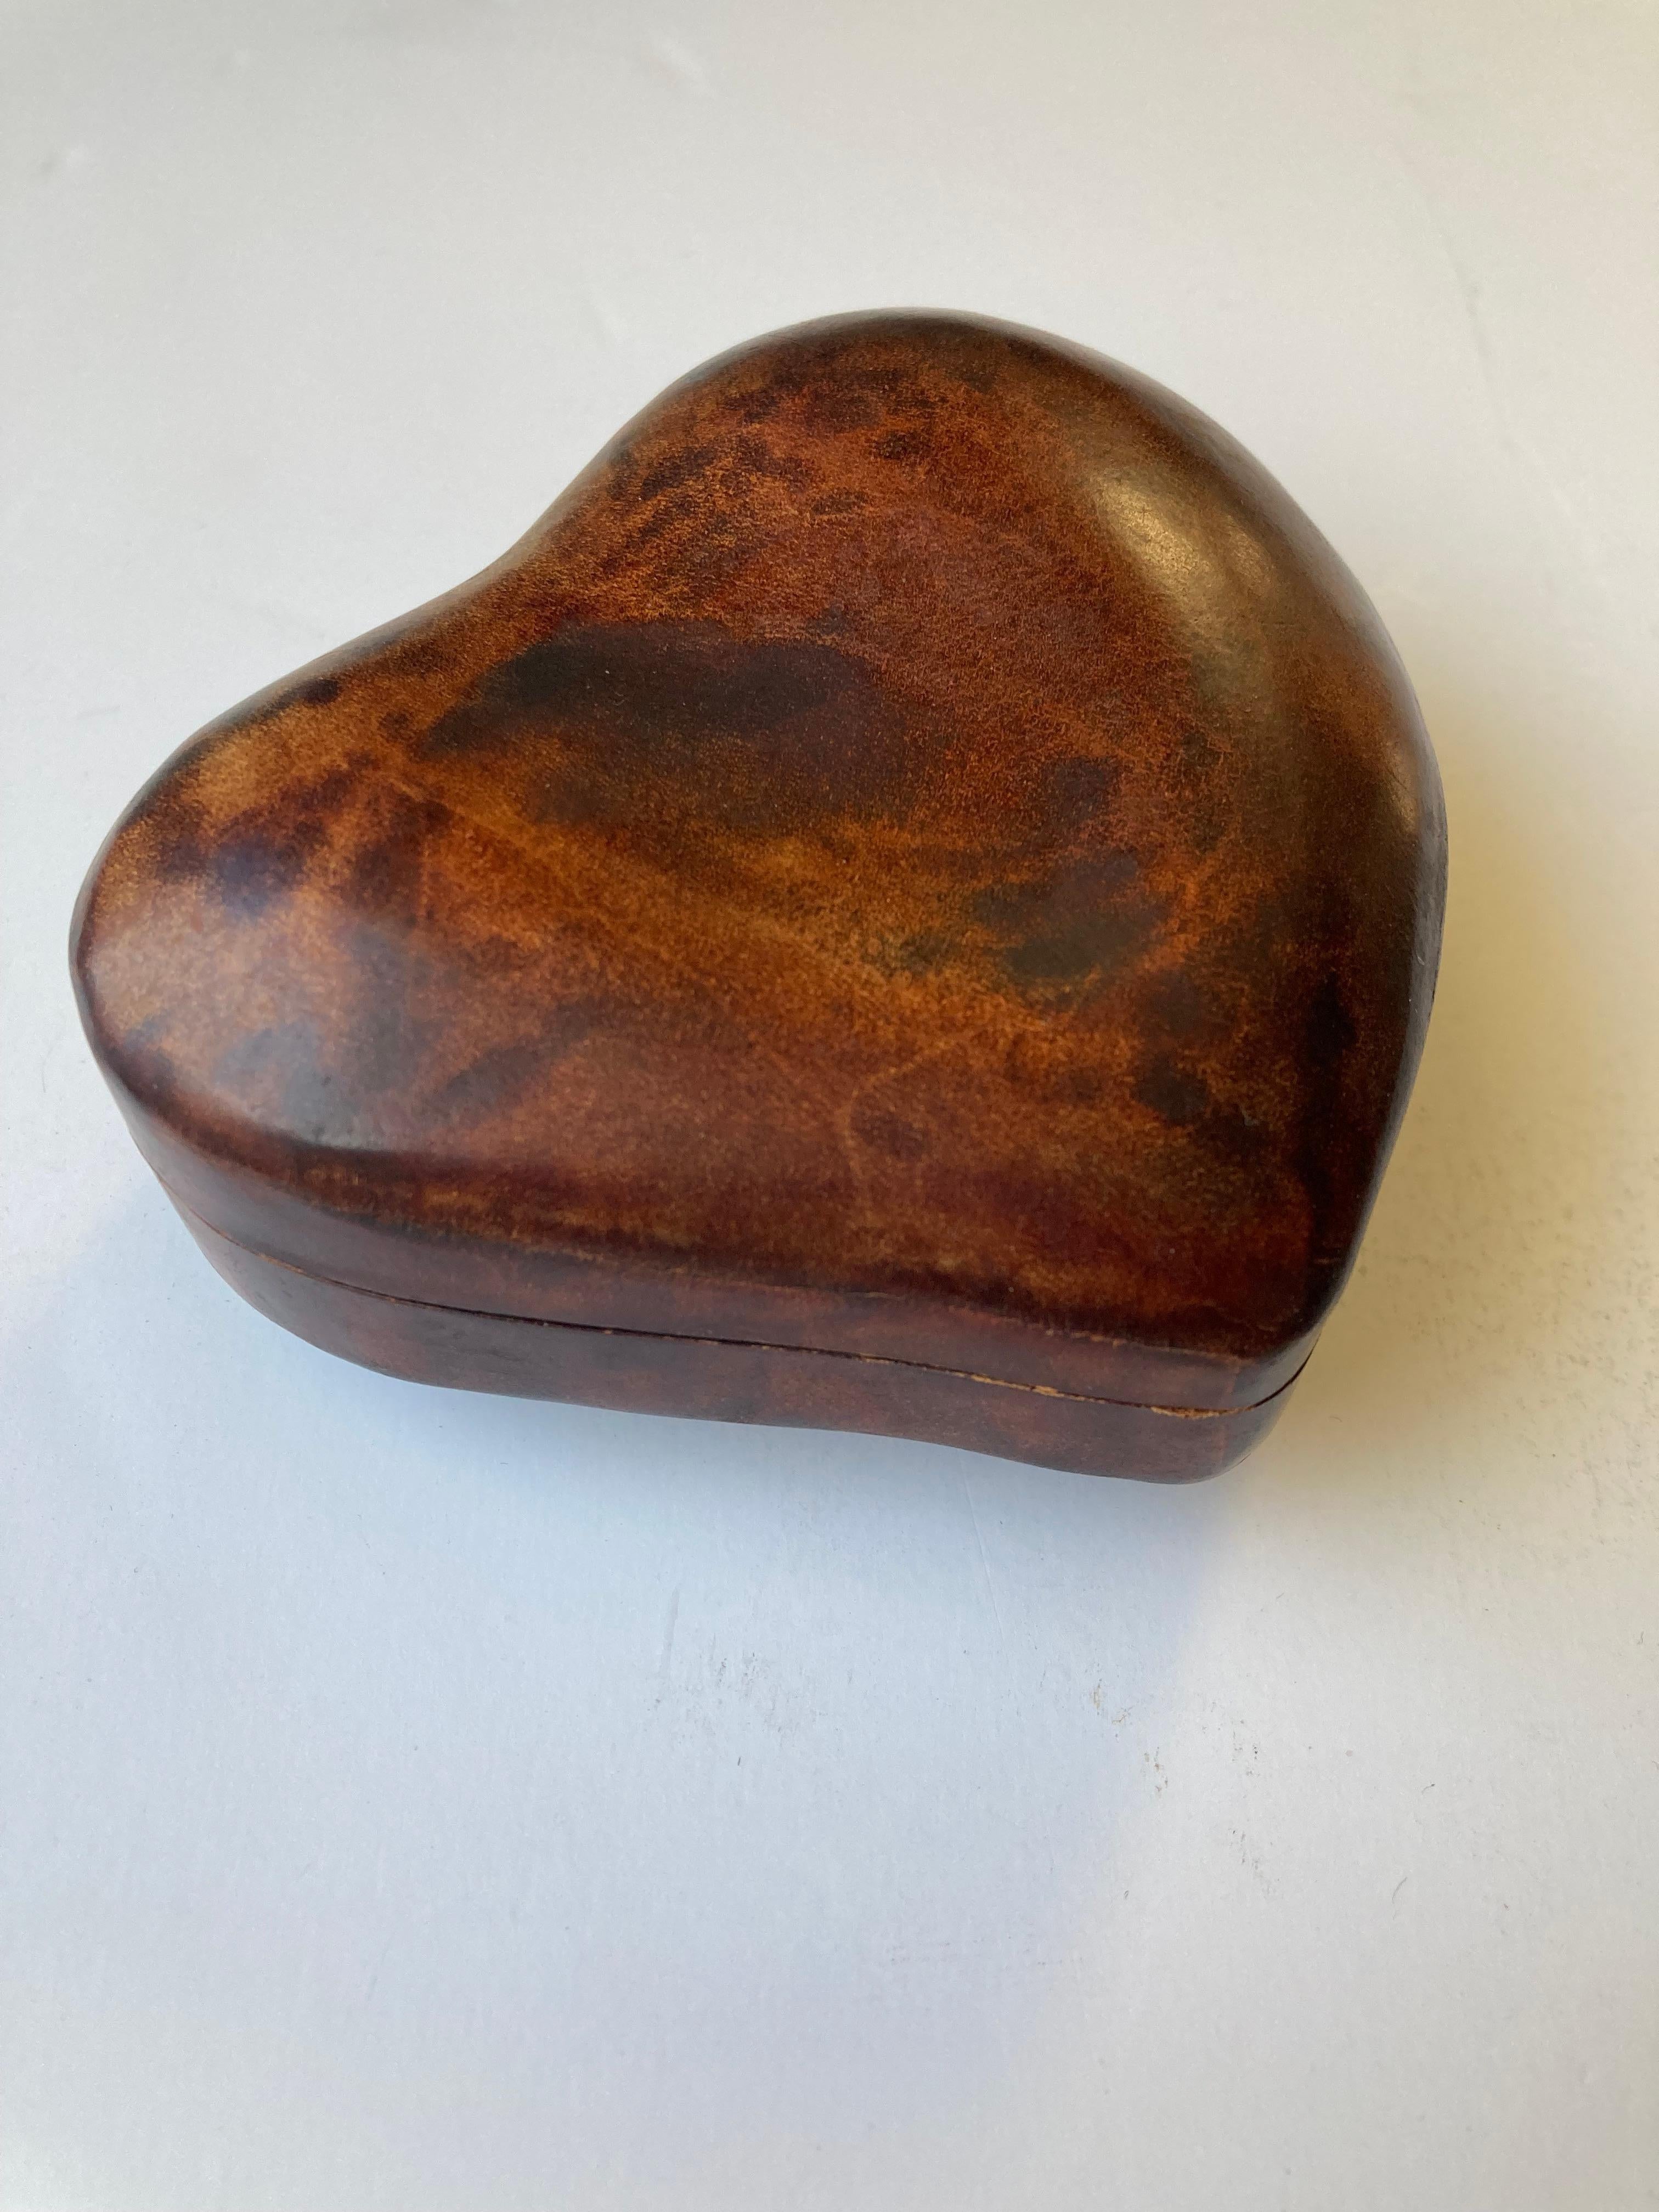 Beautiful heart shape, Love leather box designed by the well known artist / designer  Elsa Peretti.